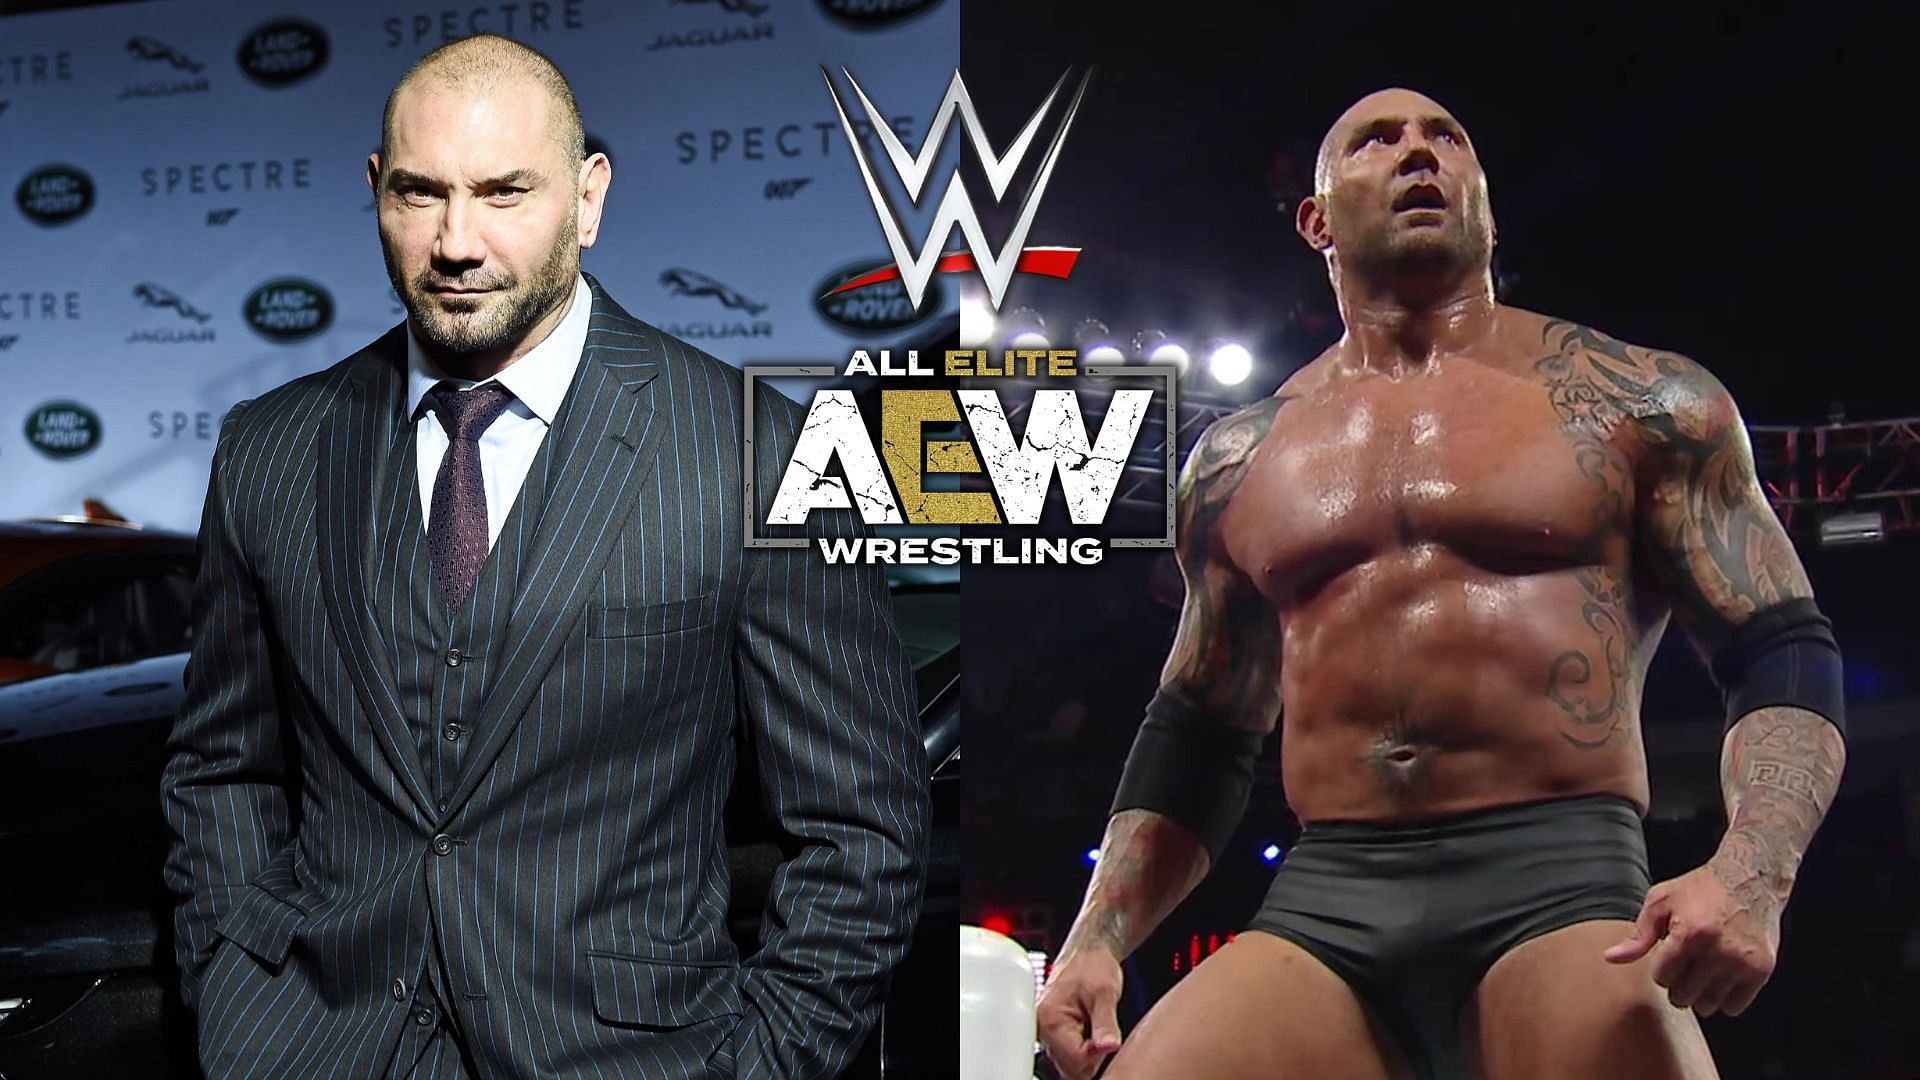 Batista is currently a very popular Hollywood actor